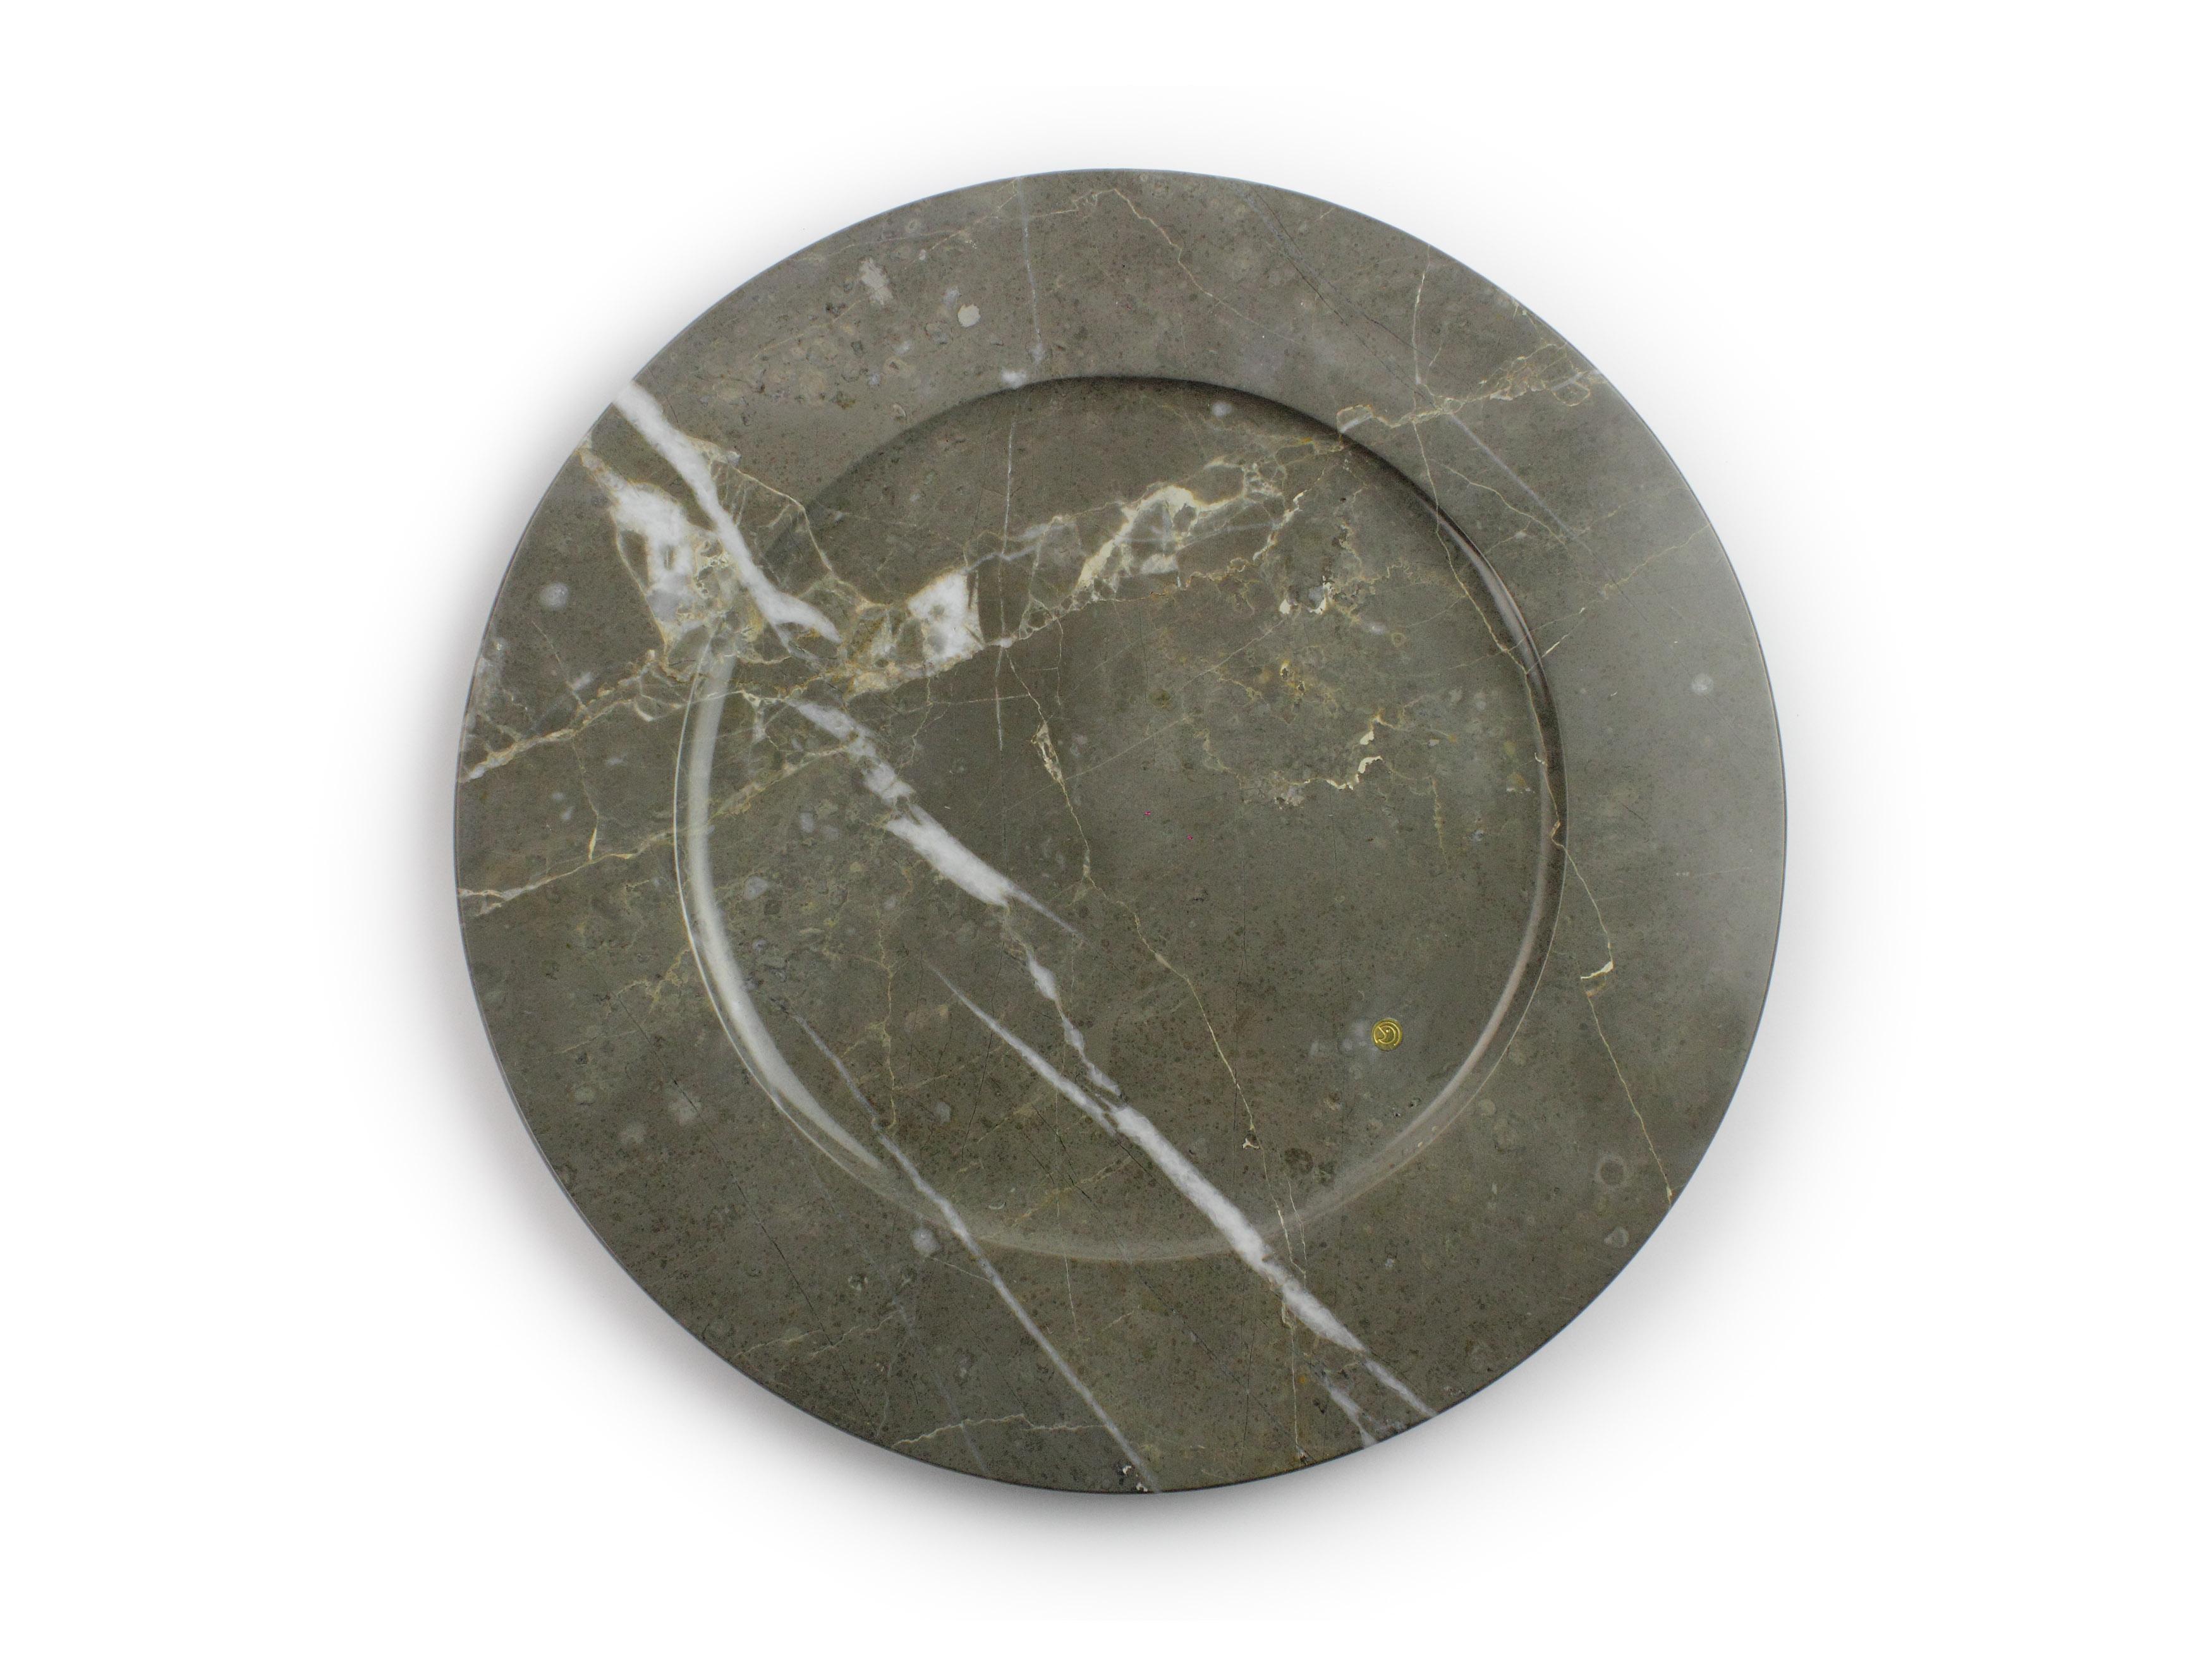 Charger Plate Platters Serveware Set of 4 Imperial Grey Marble Handmade Italy In New Condition For Sale In Ancona, Marche